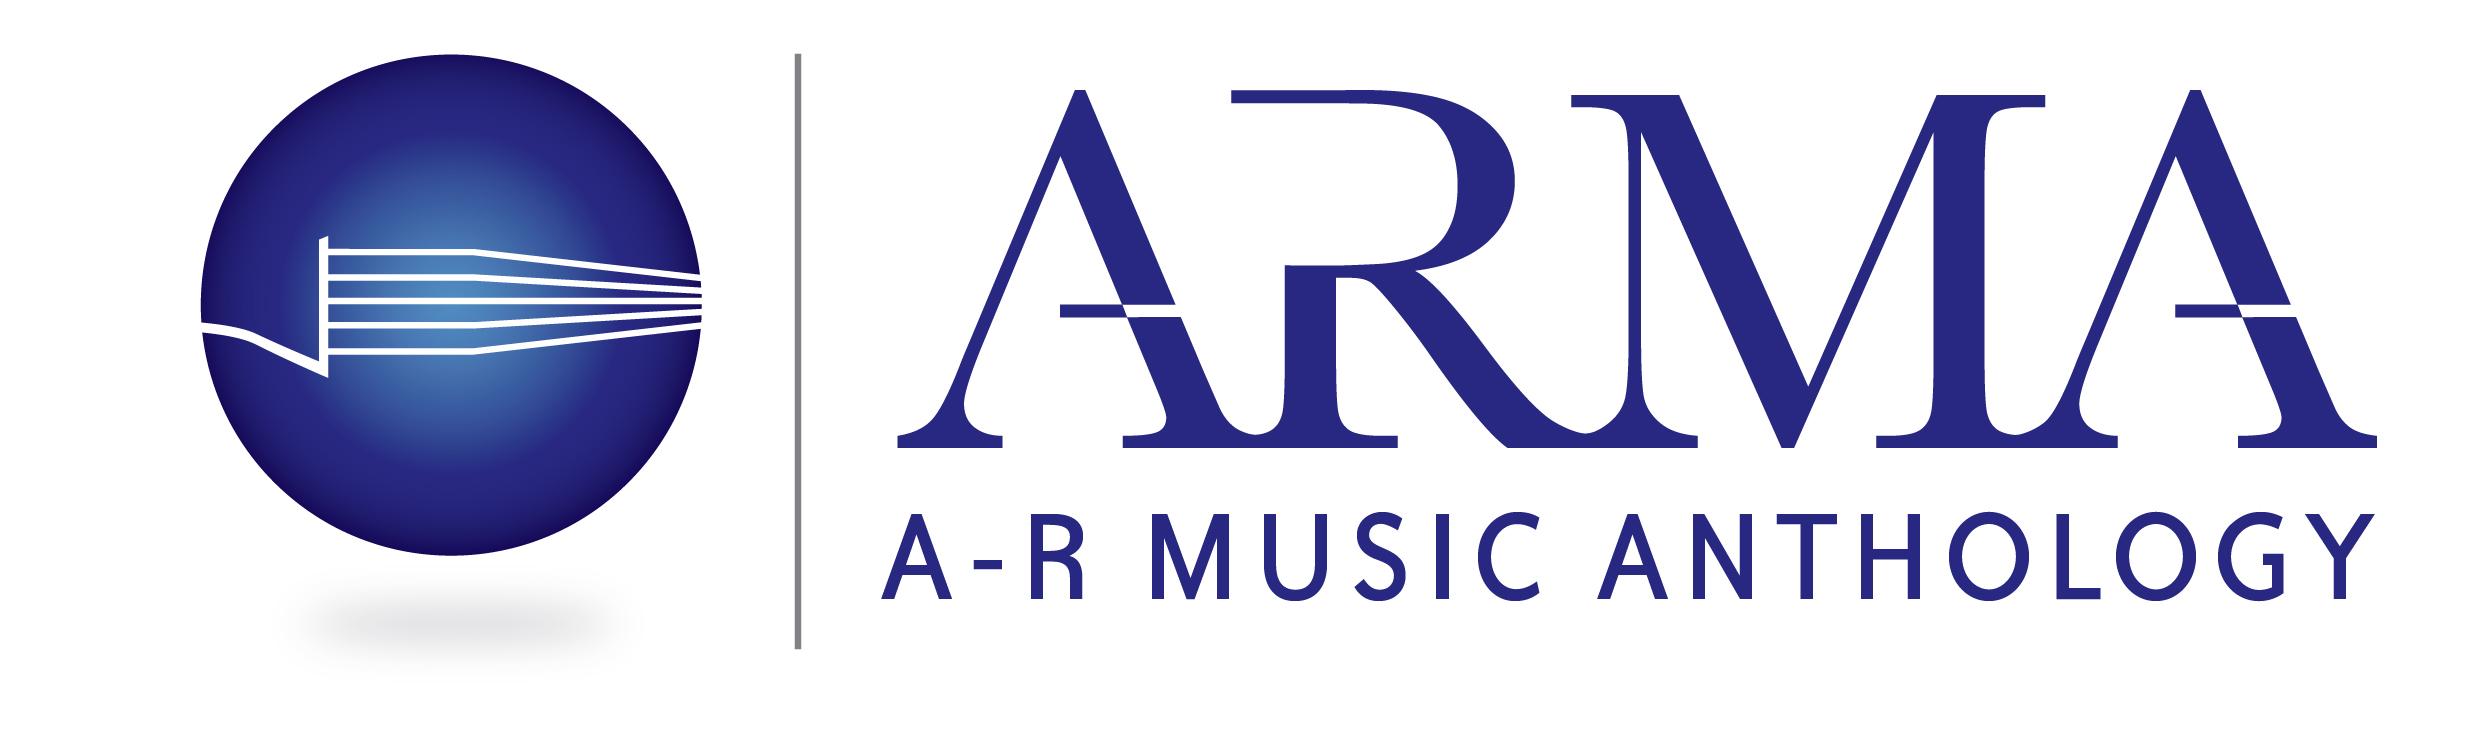 A logo for A-R Music Anthology or ARMA for short